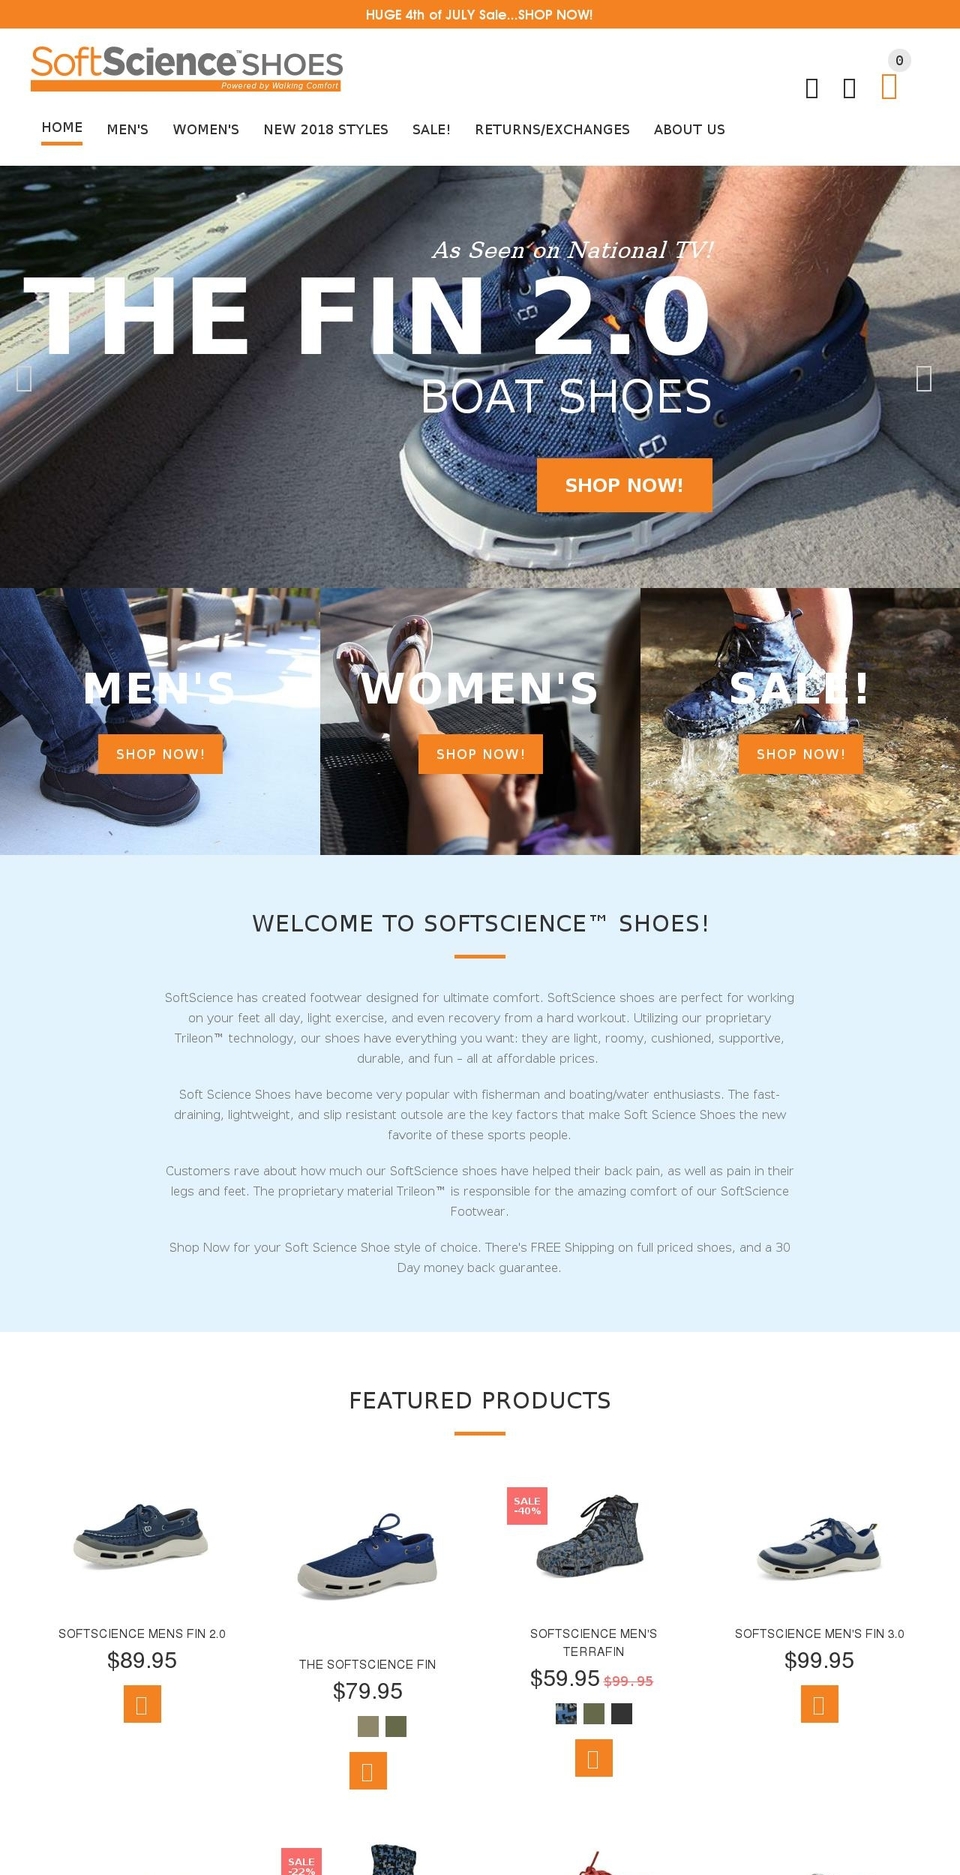 yourstore-v2-1-6 Shopify theme site example softsciencefootwear.com